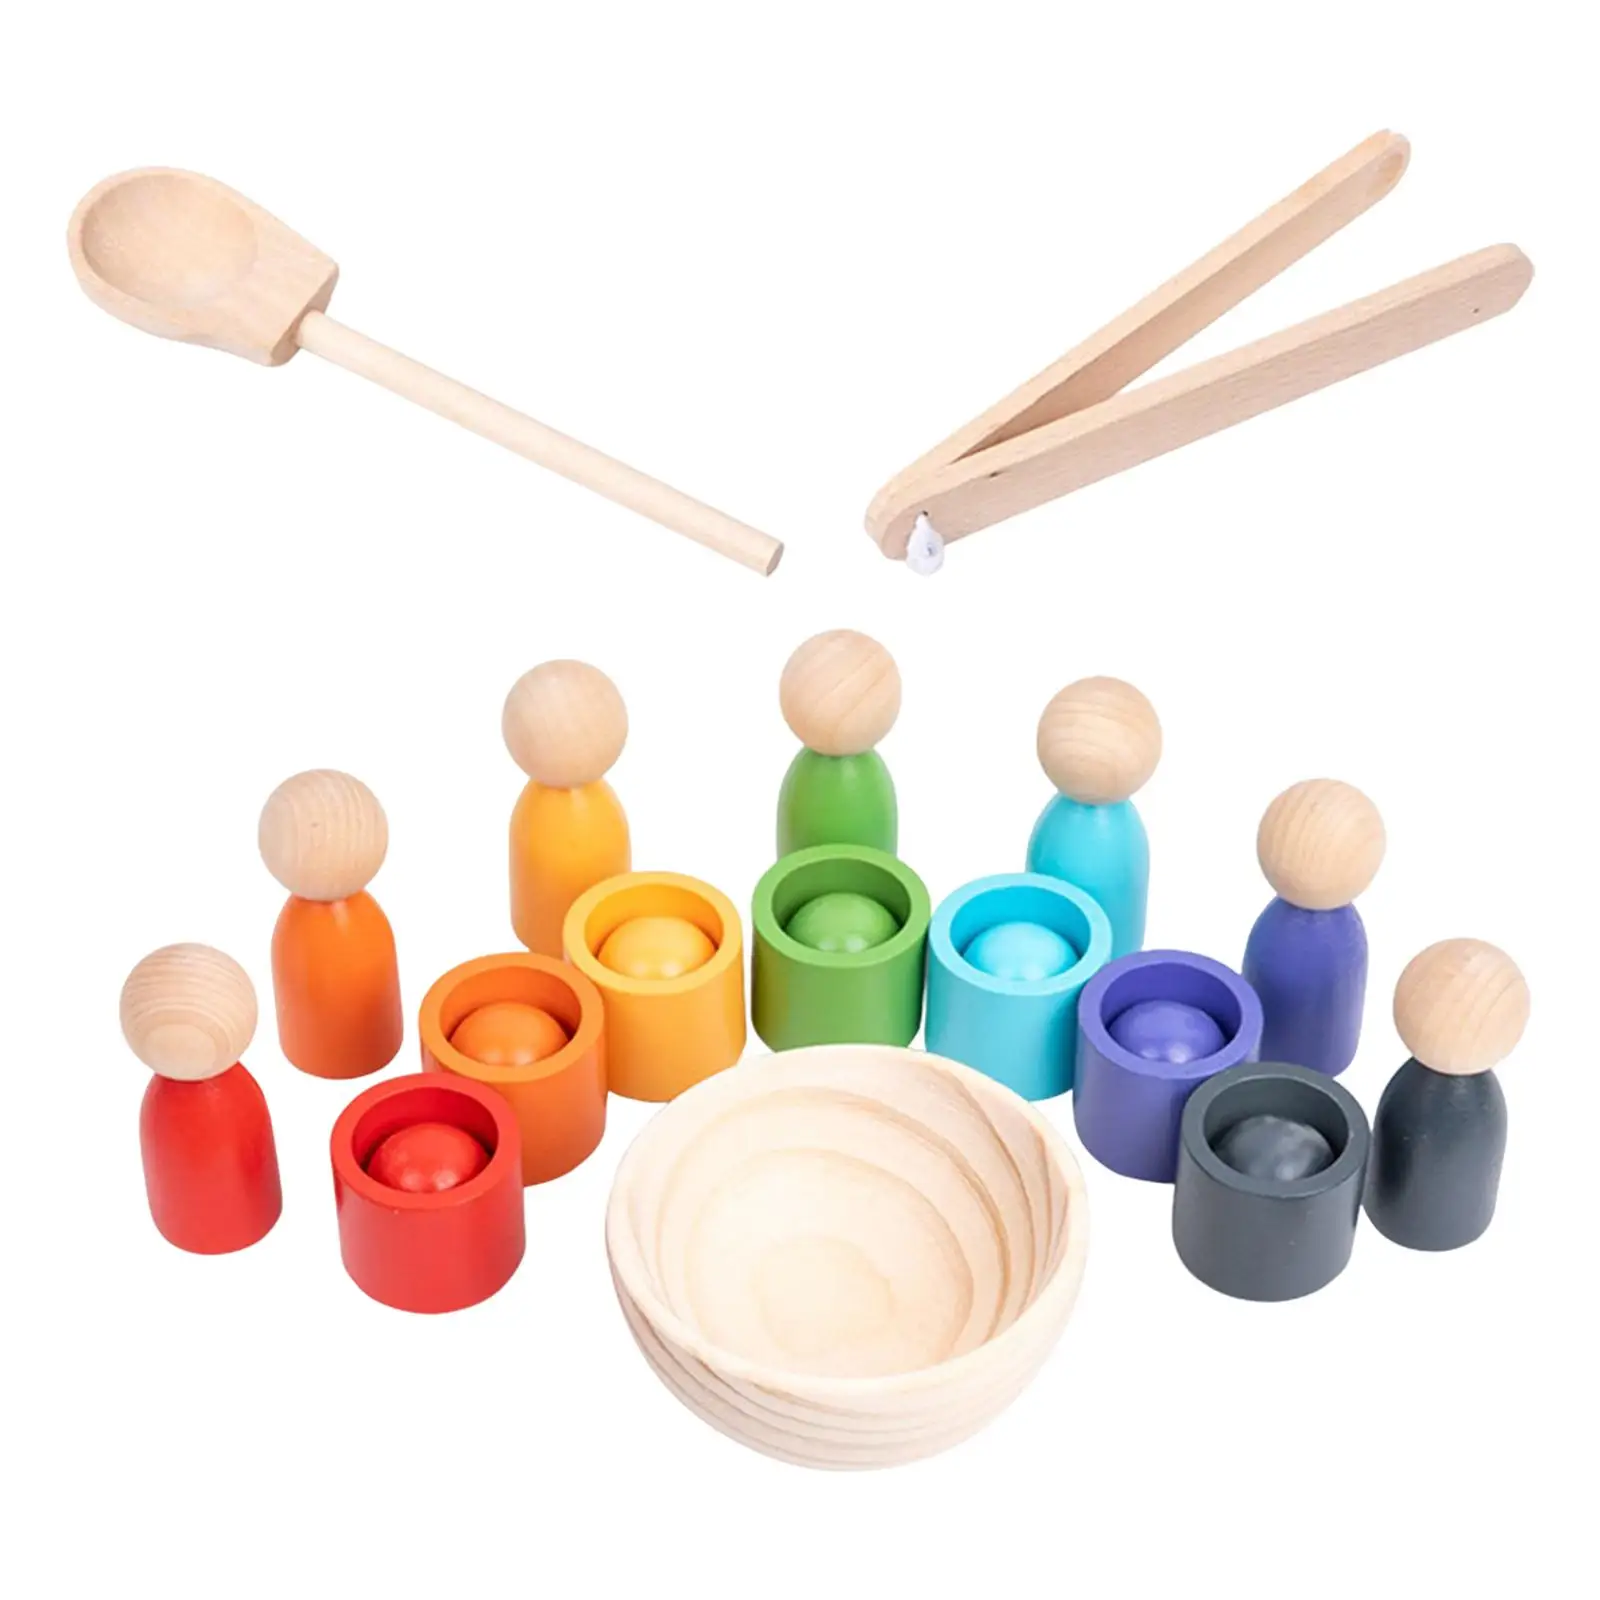 Wooden Balls in Cups Montessori 7 color Fine Motor Color Sorting and Counting with Cups and Balls Preschool Sensory Toys